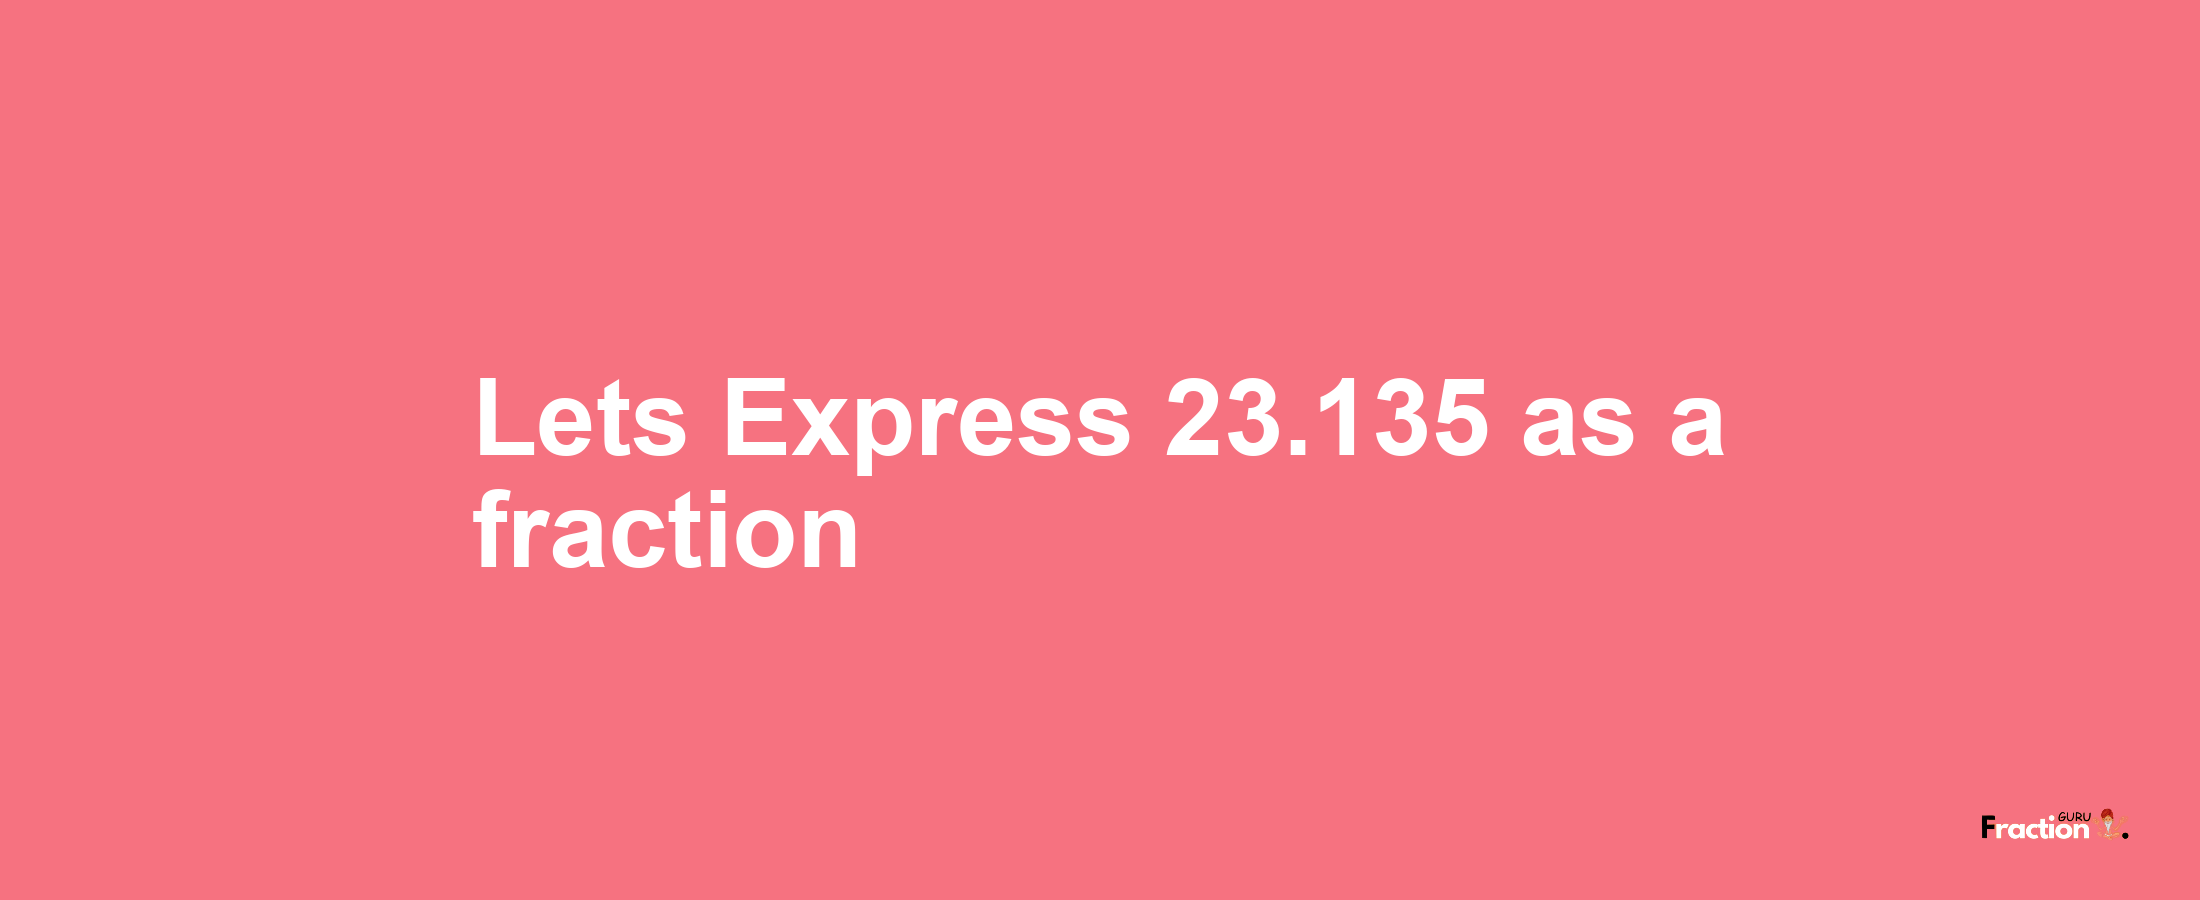 Lets Express 23.135 as afraction